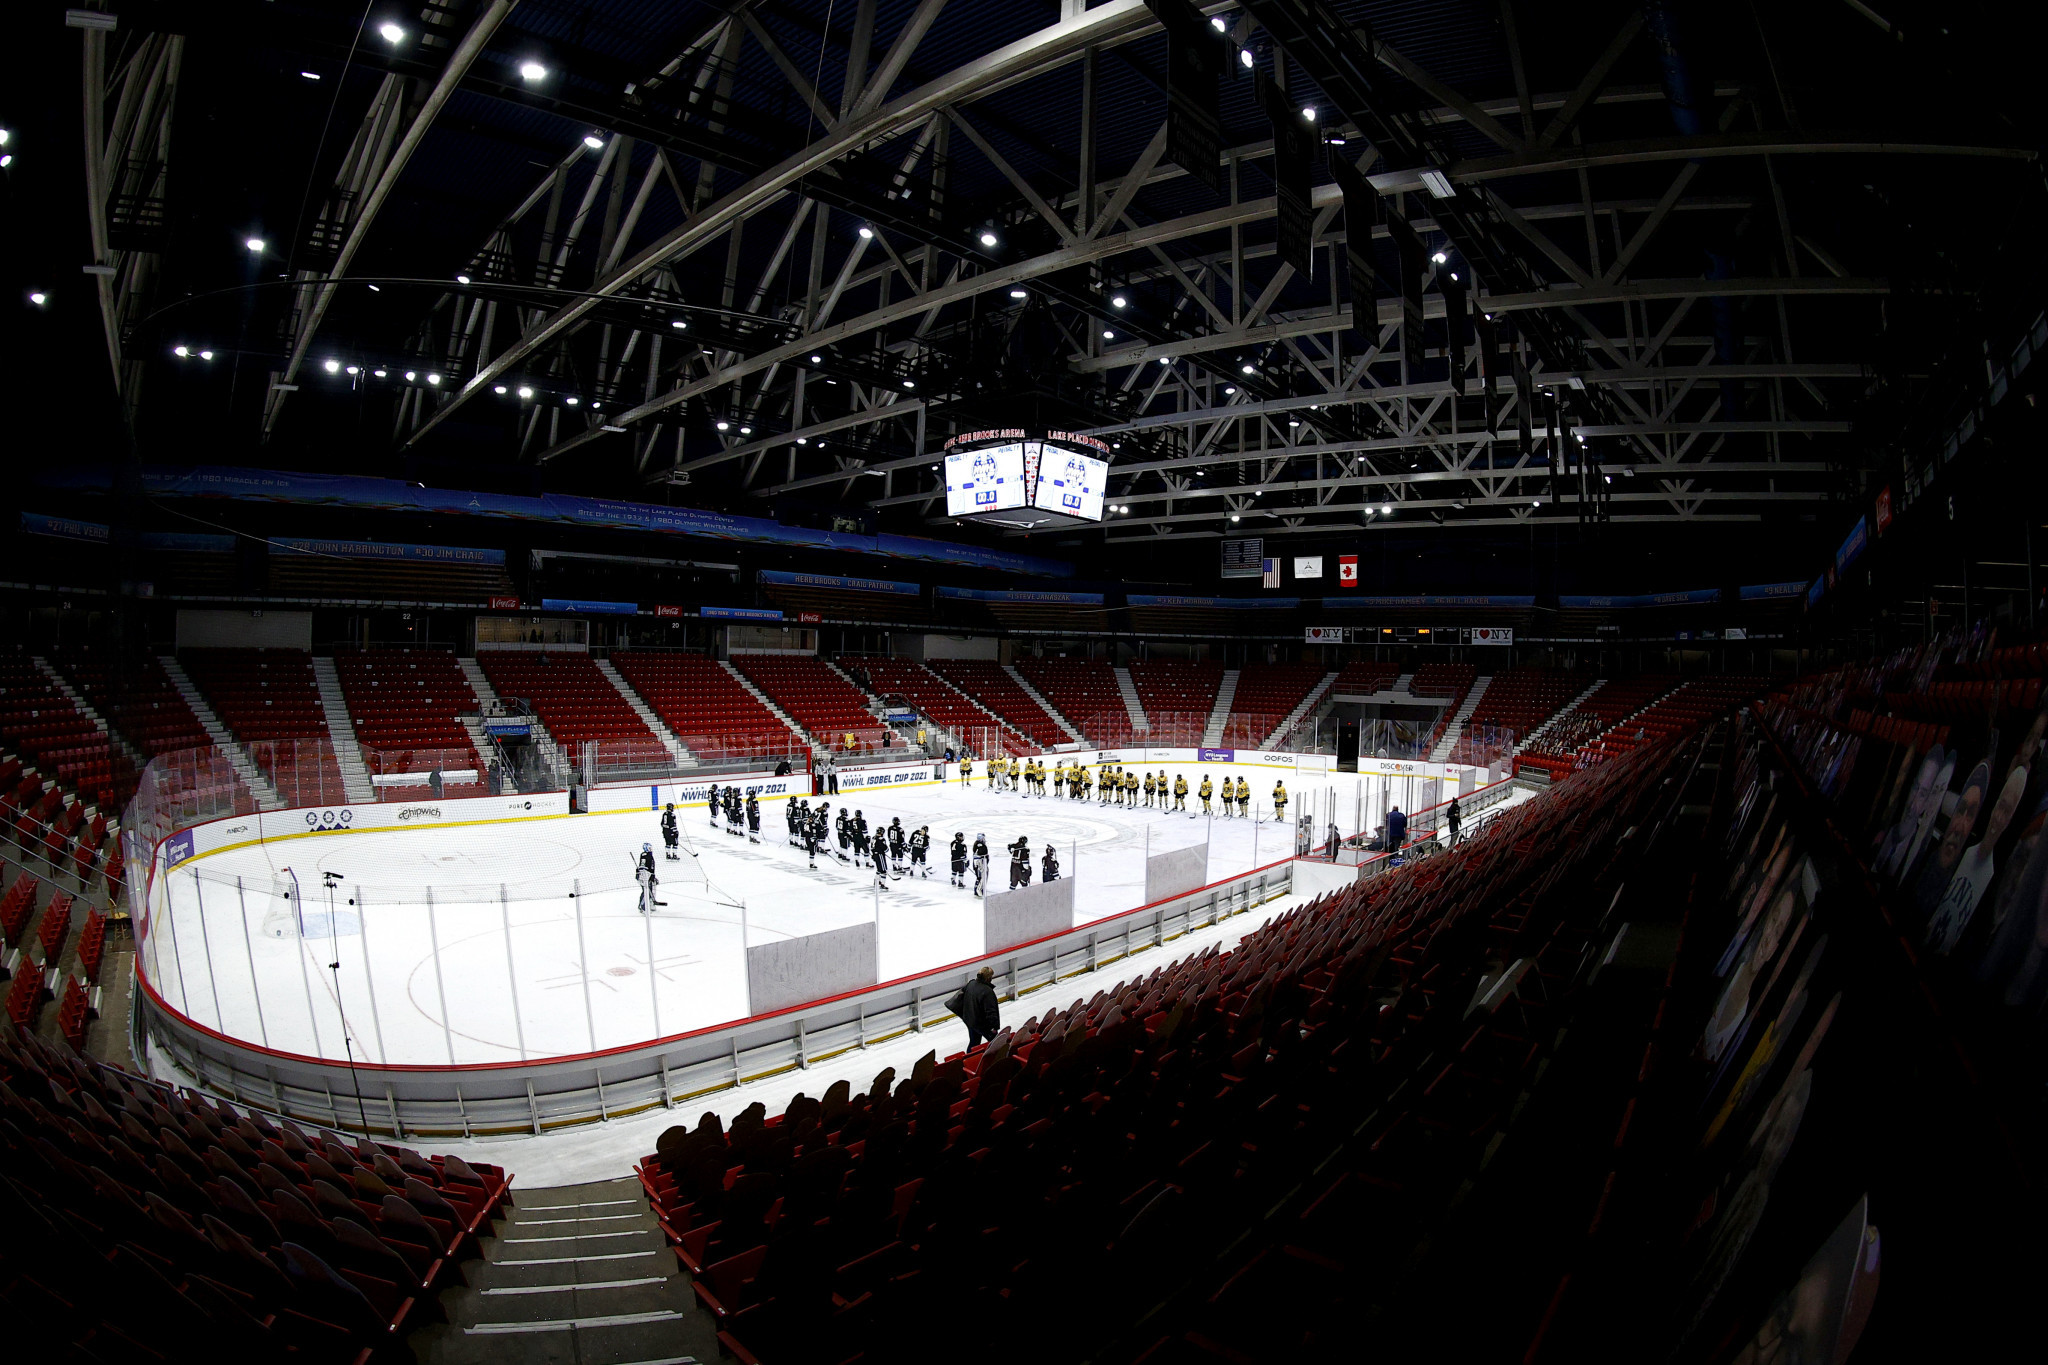 The Herb Brooks Arena in the Olympic Center is likely to host the ice hockey events at the 2023 Winter World University Games ©Getty Images